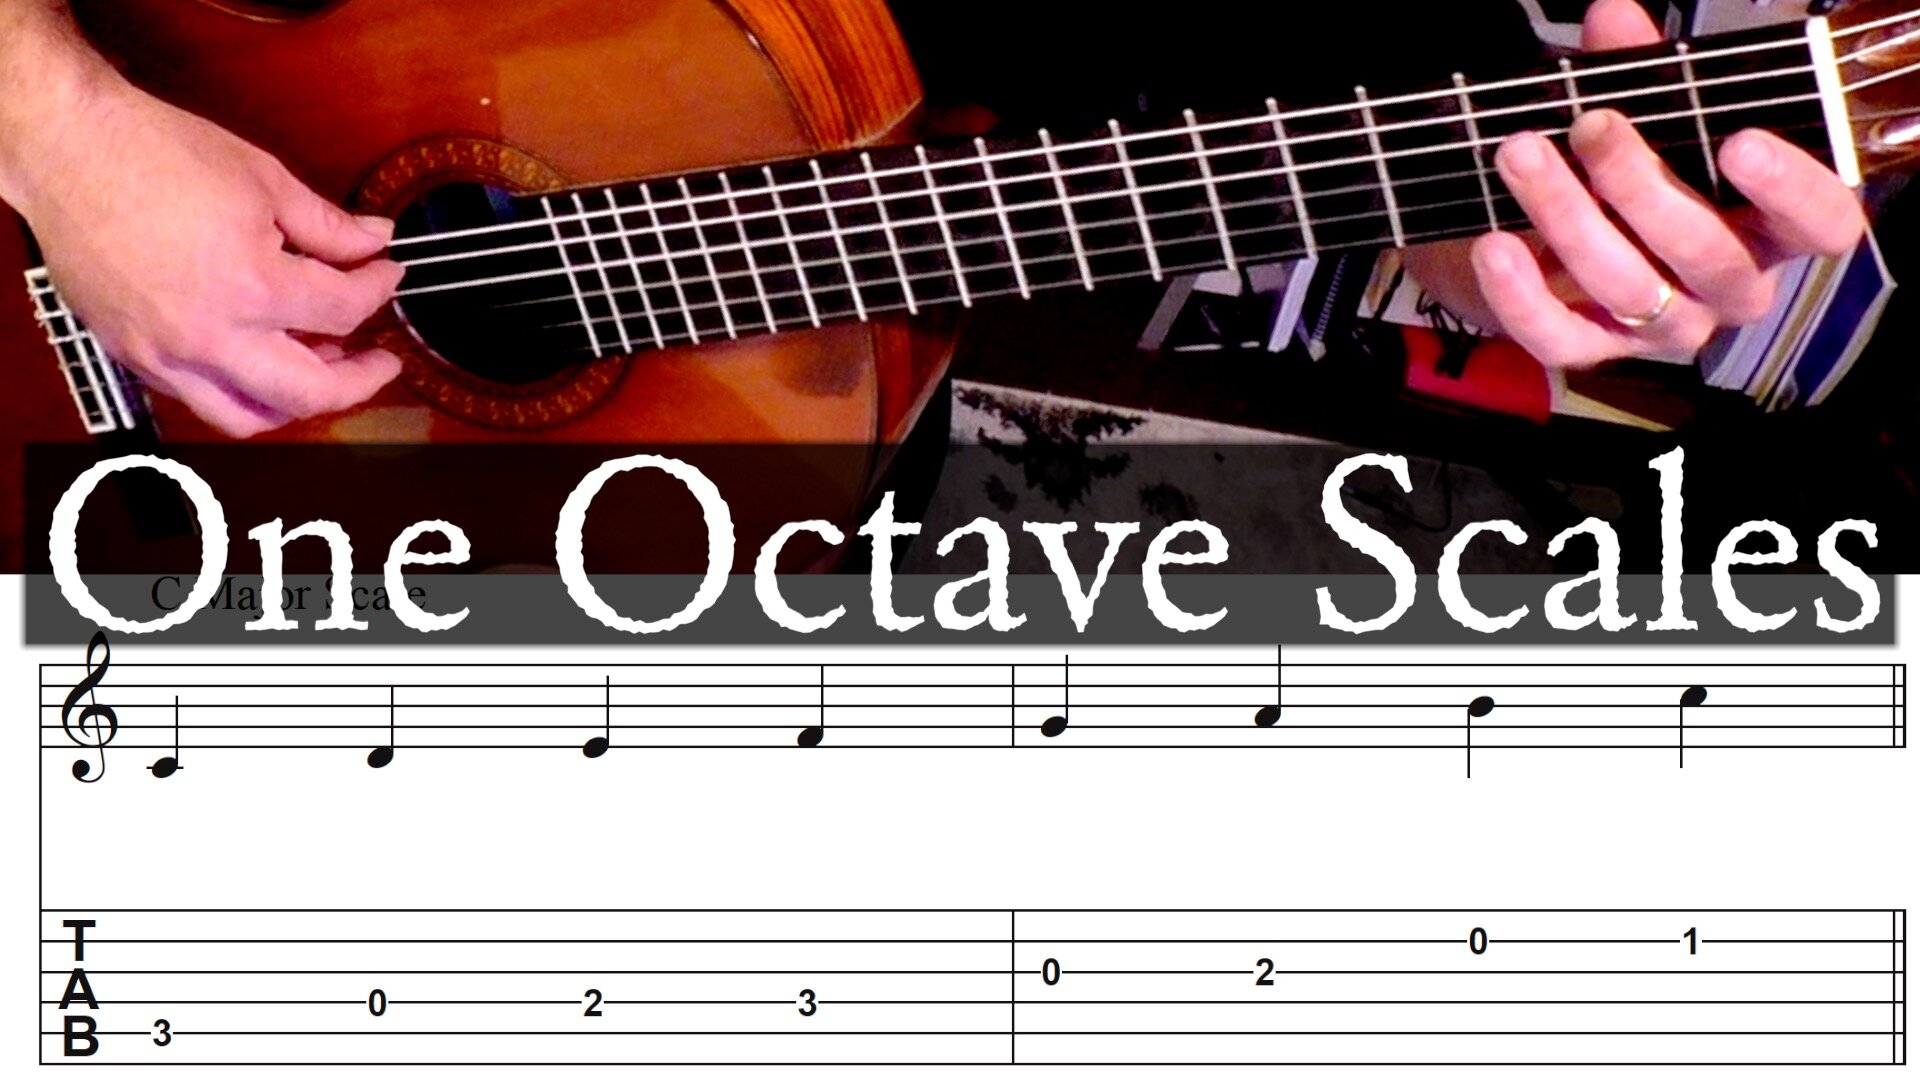 One Octave Scales Thumbnail.jpg